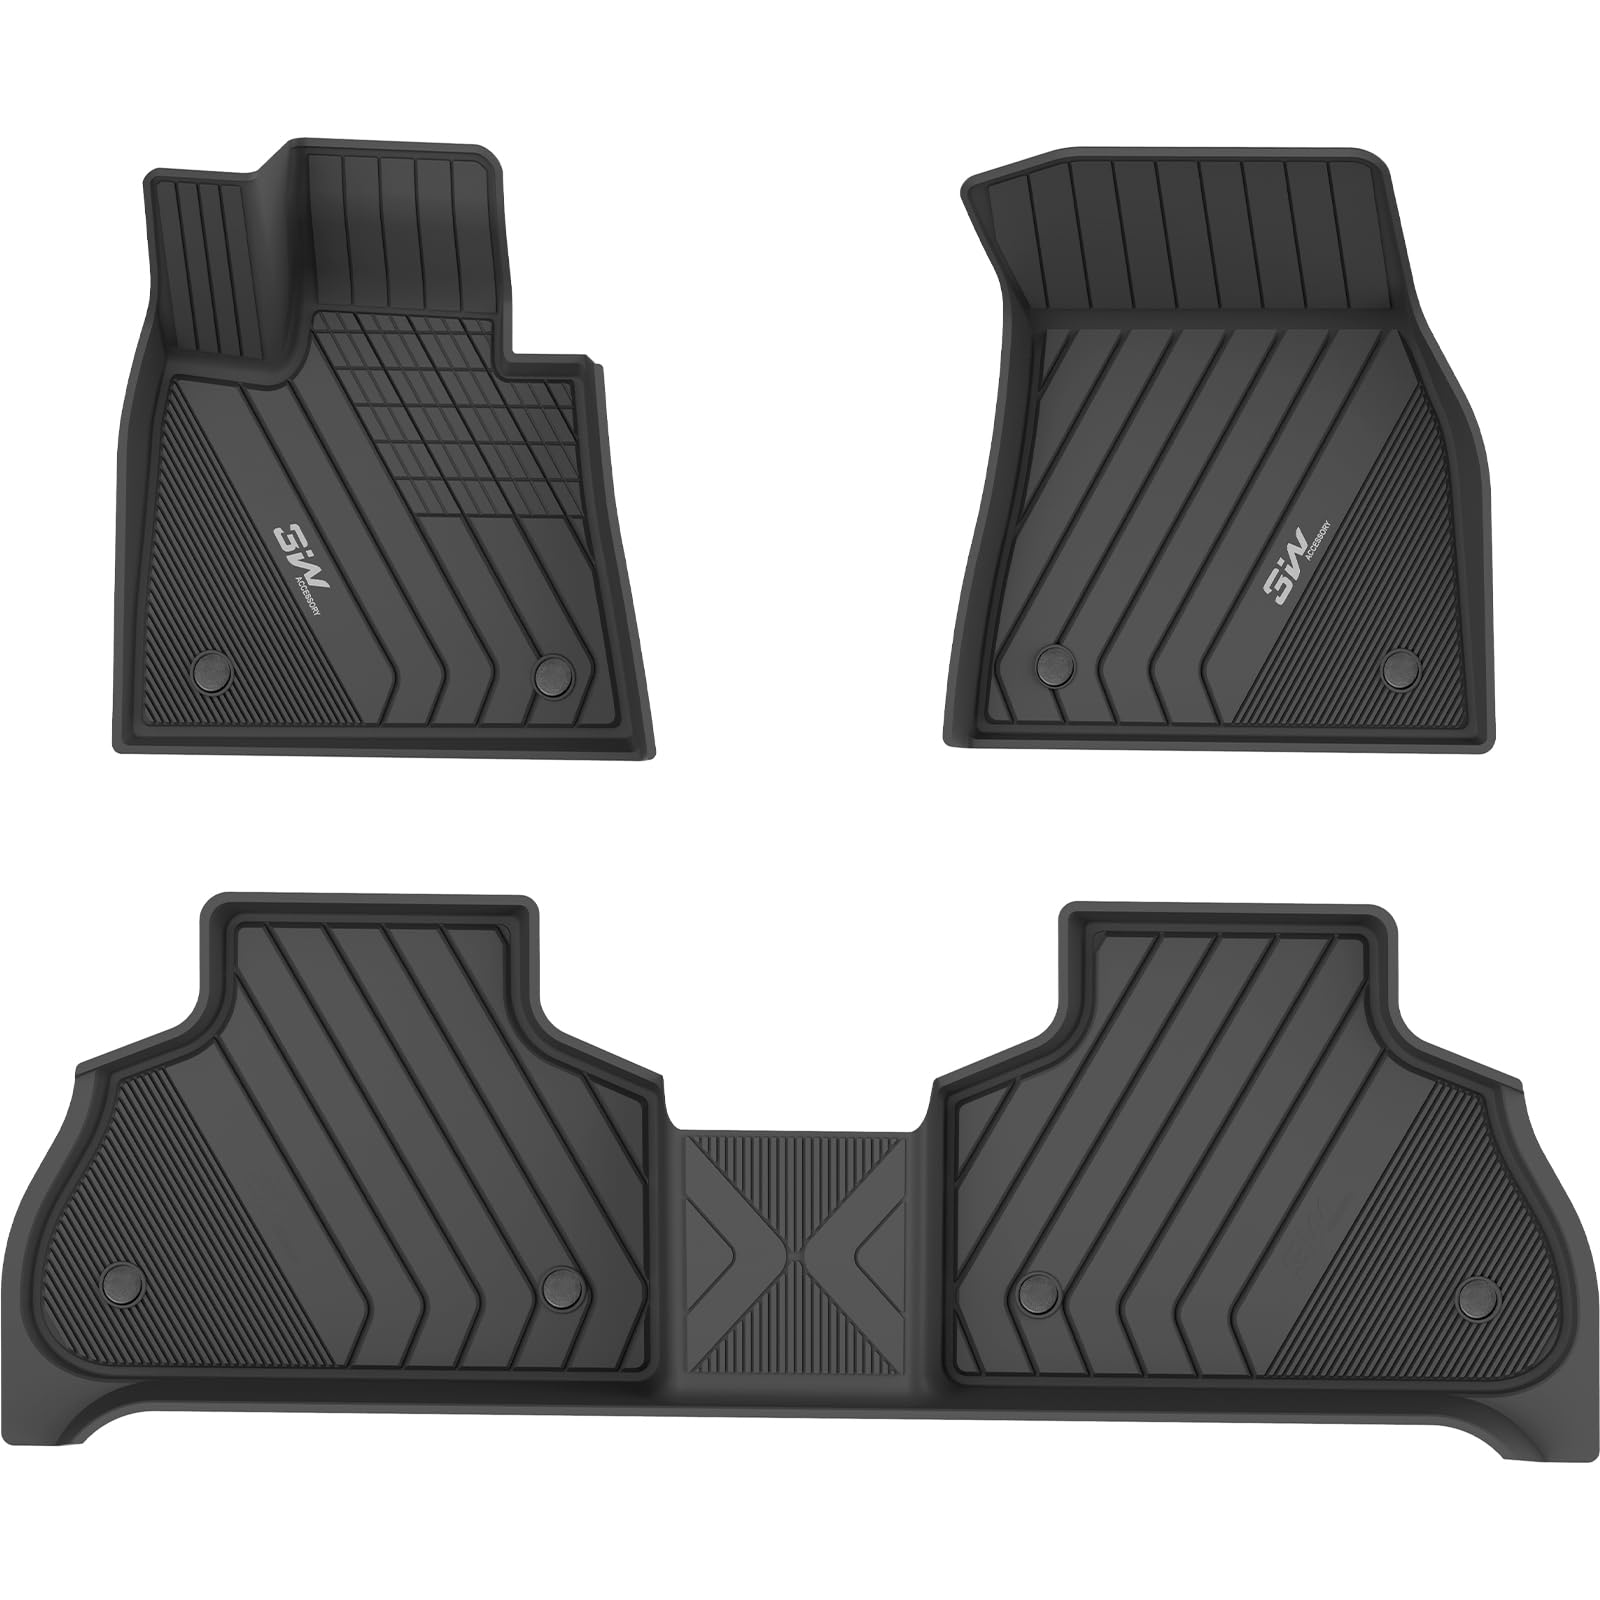 3W BMW X5 2019-2024 Custom Floor Mats / Trunk Mat TPE Material & All-Weather Protection Vehicles & Parts 3Wliners 2019-2024 X5 2019-2024 1st&2nd Row Mats